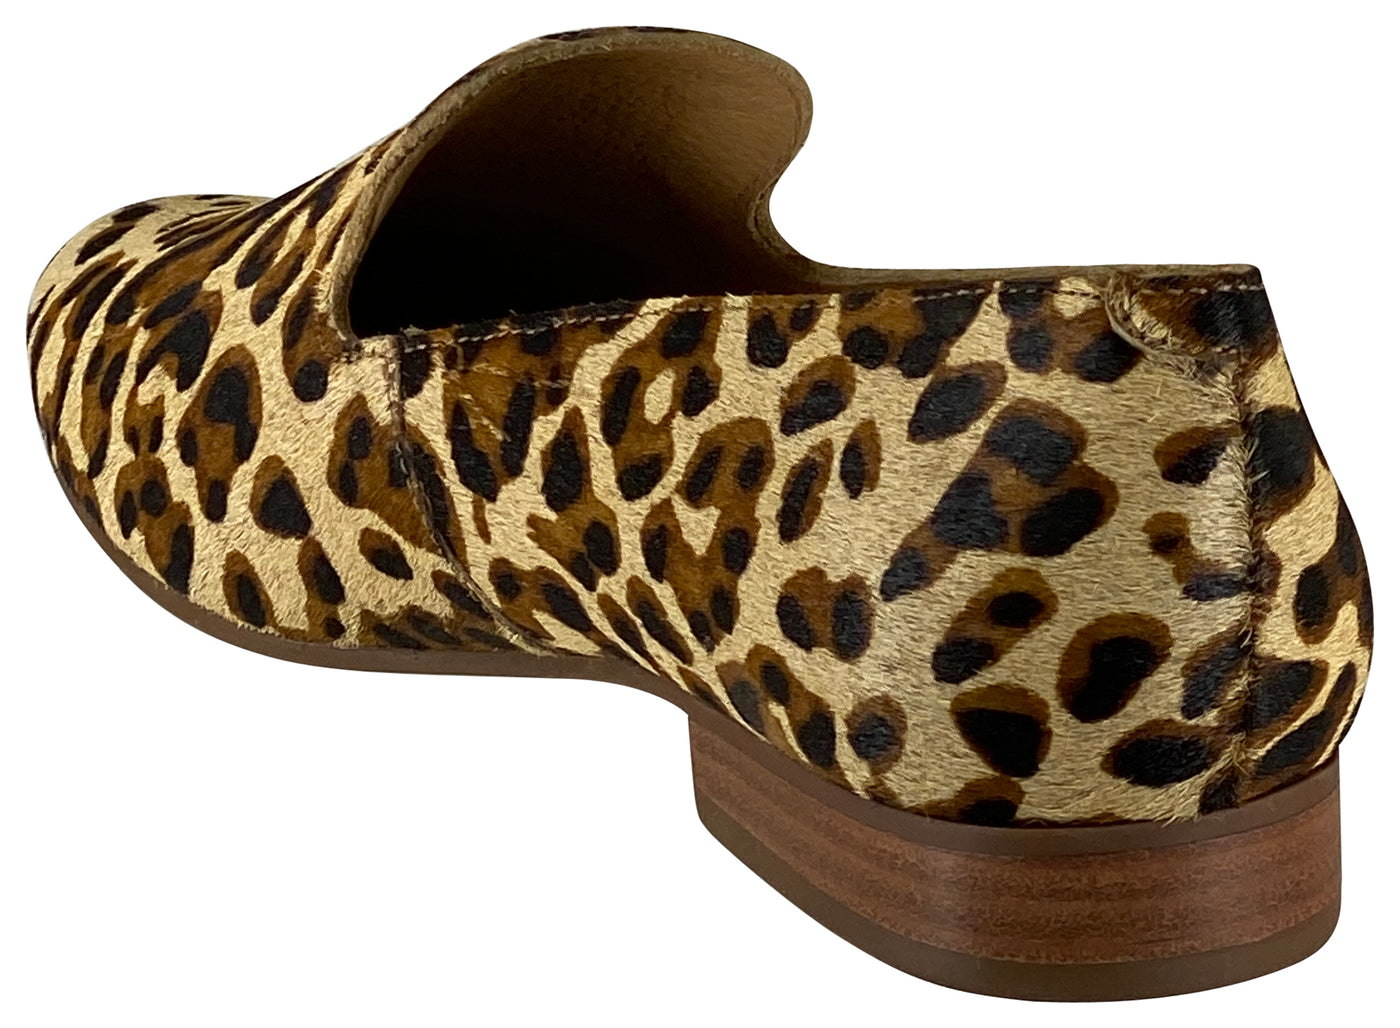 AUDREY HAIRCALF LOAFER LEOPARD